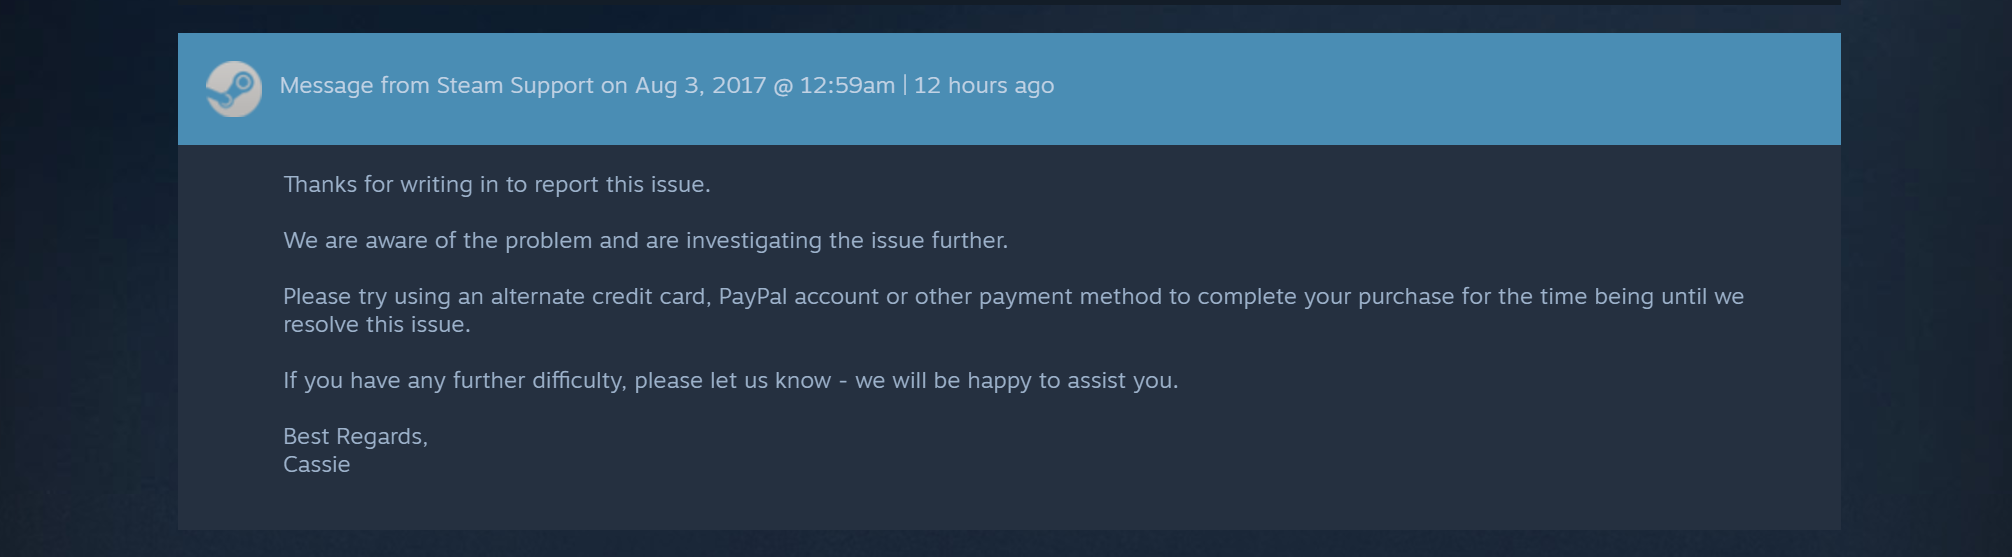 New payment method steam фото 58